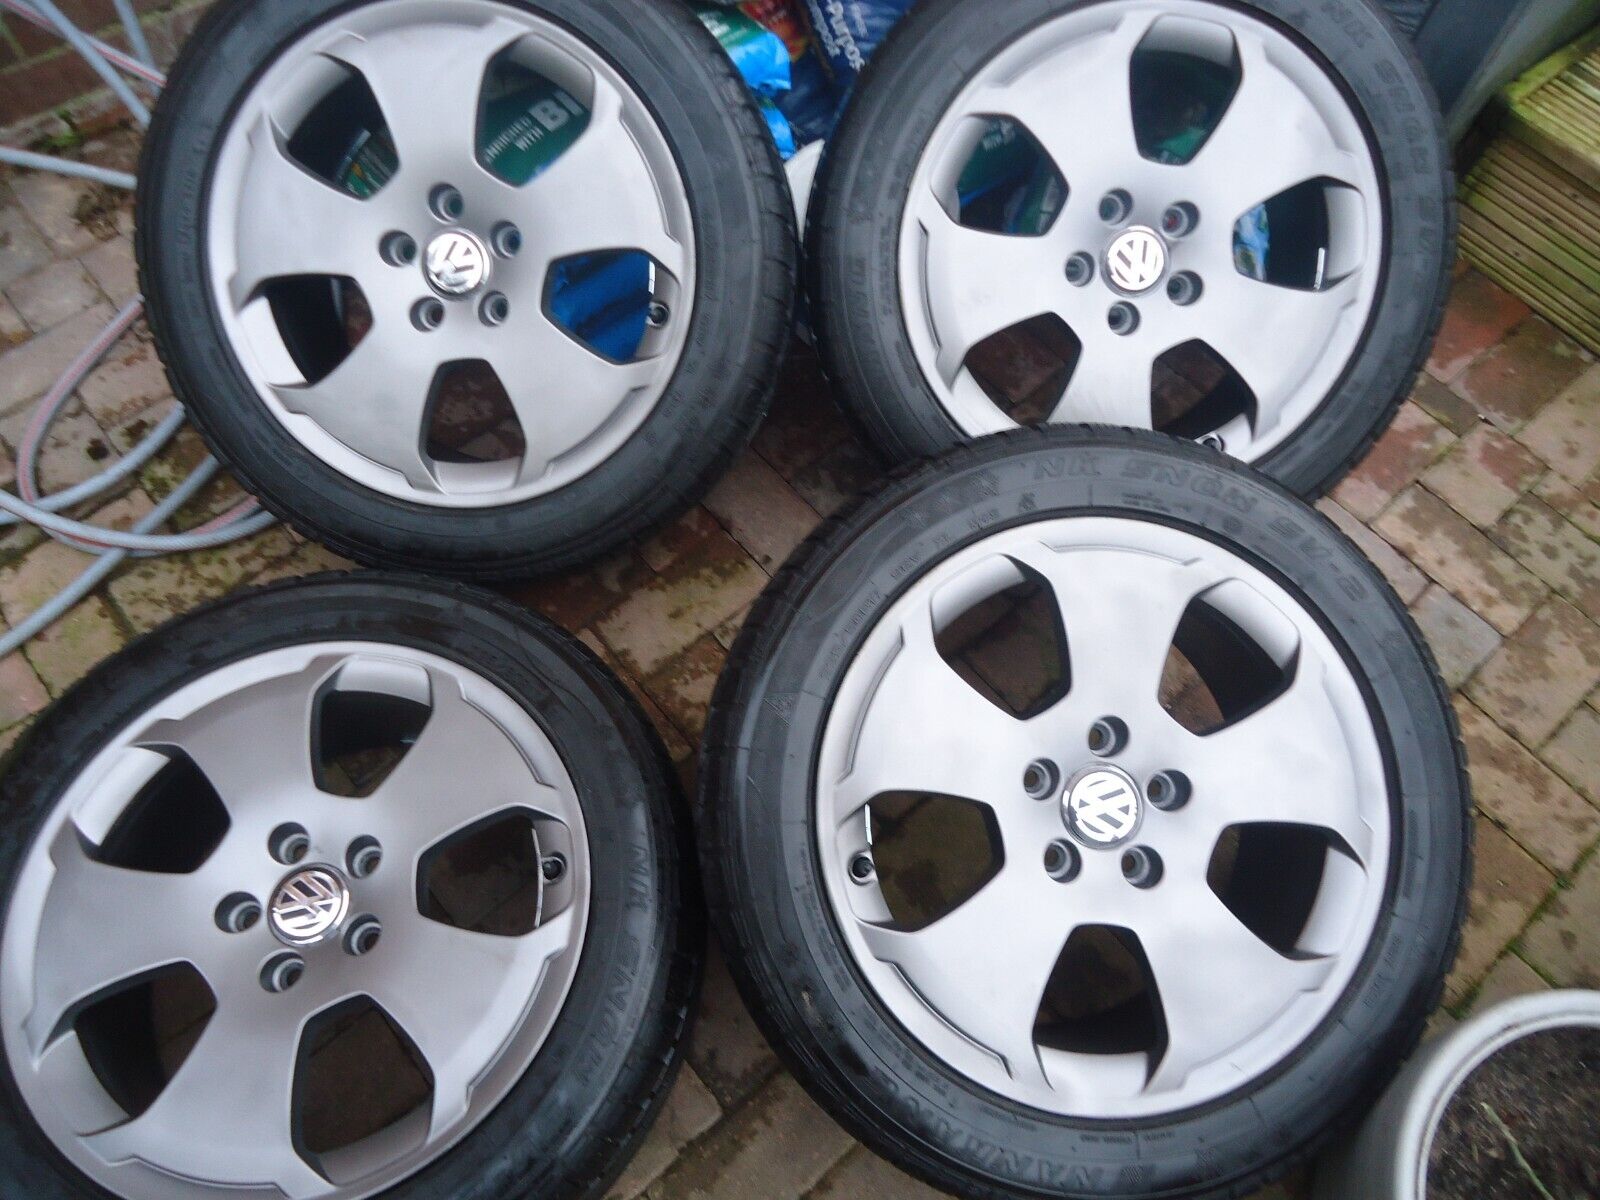 17x4 Alloys Wheels and WINTER TYRES Will Fit VwT4 VW Caddy Golf Passat Sharan